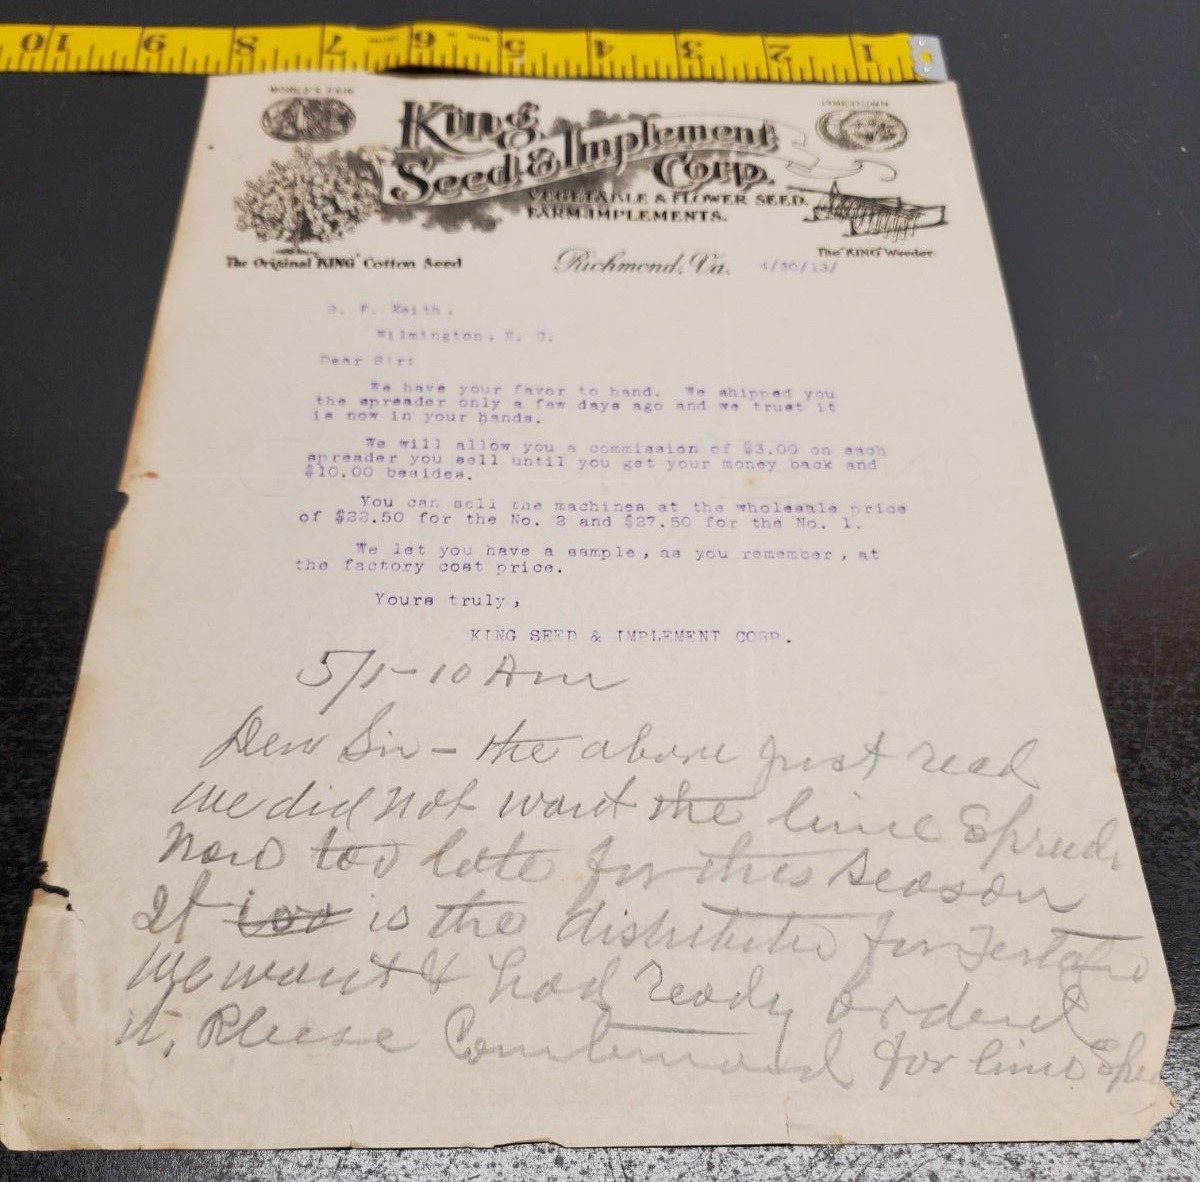 1913 King Seed & Implement Corp. letter-Vegetable & Flower Seed - Richmond VA